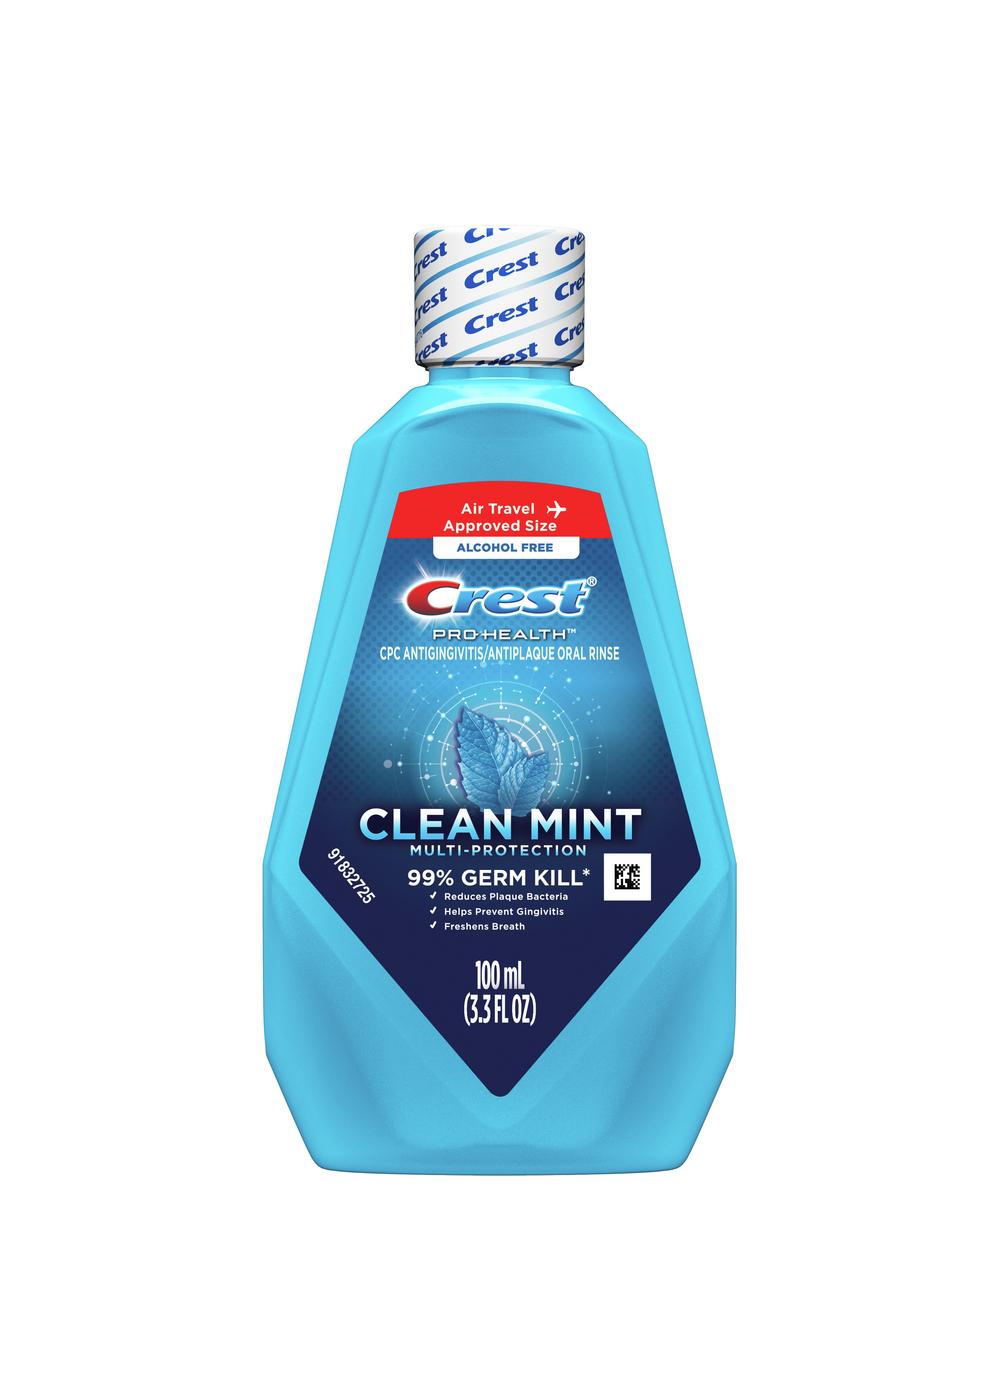 Crest Pro Health Multi Protection Oral Rinse - Clean Mint; image 1 of 6